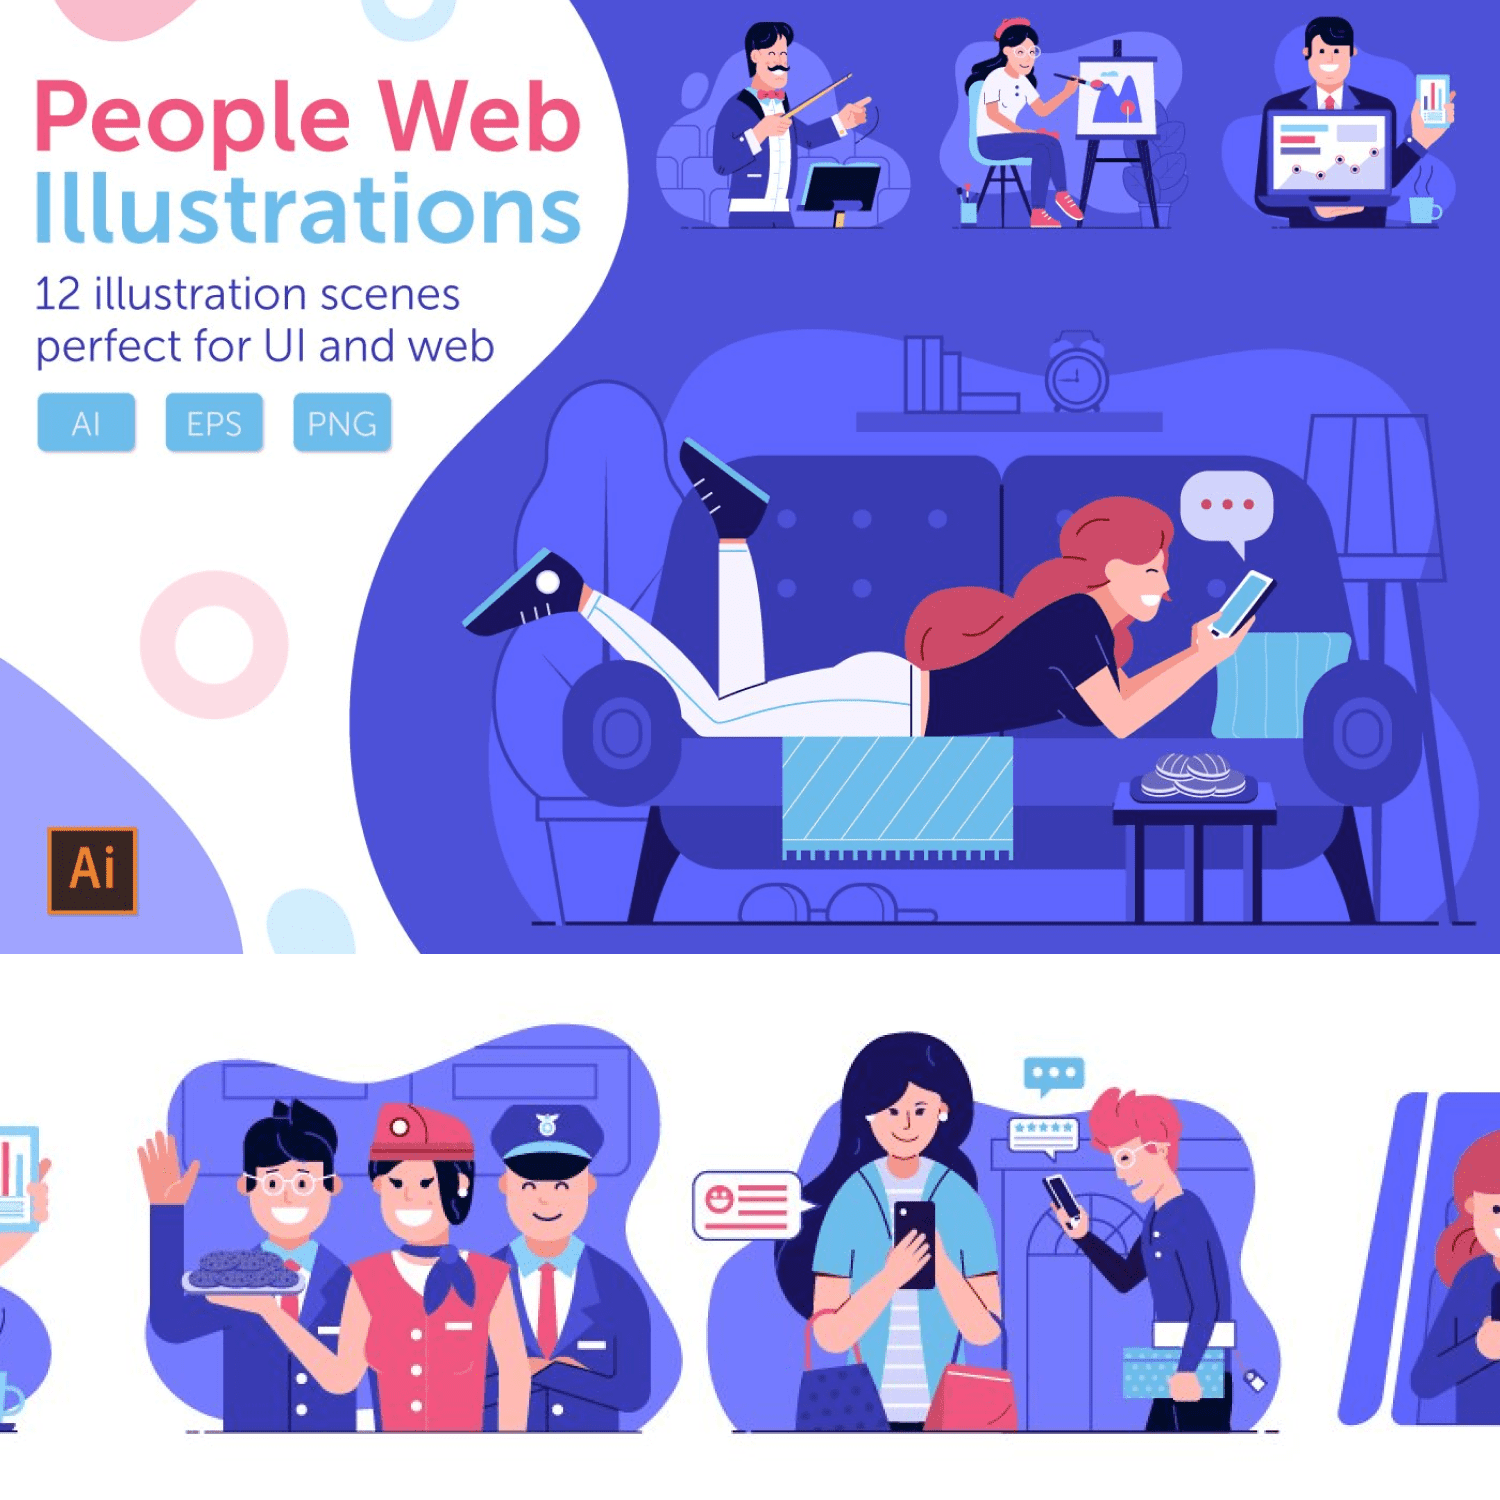 Save Web Marketing People Illustrations cover.